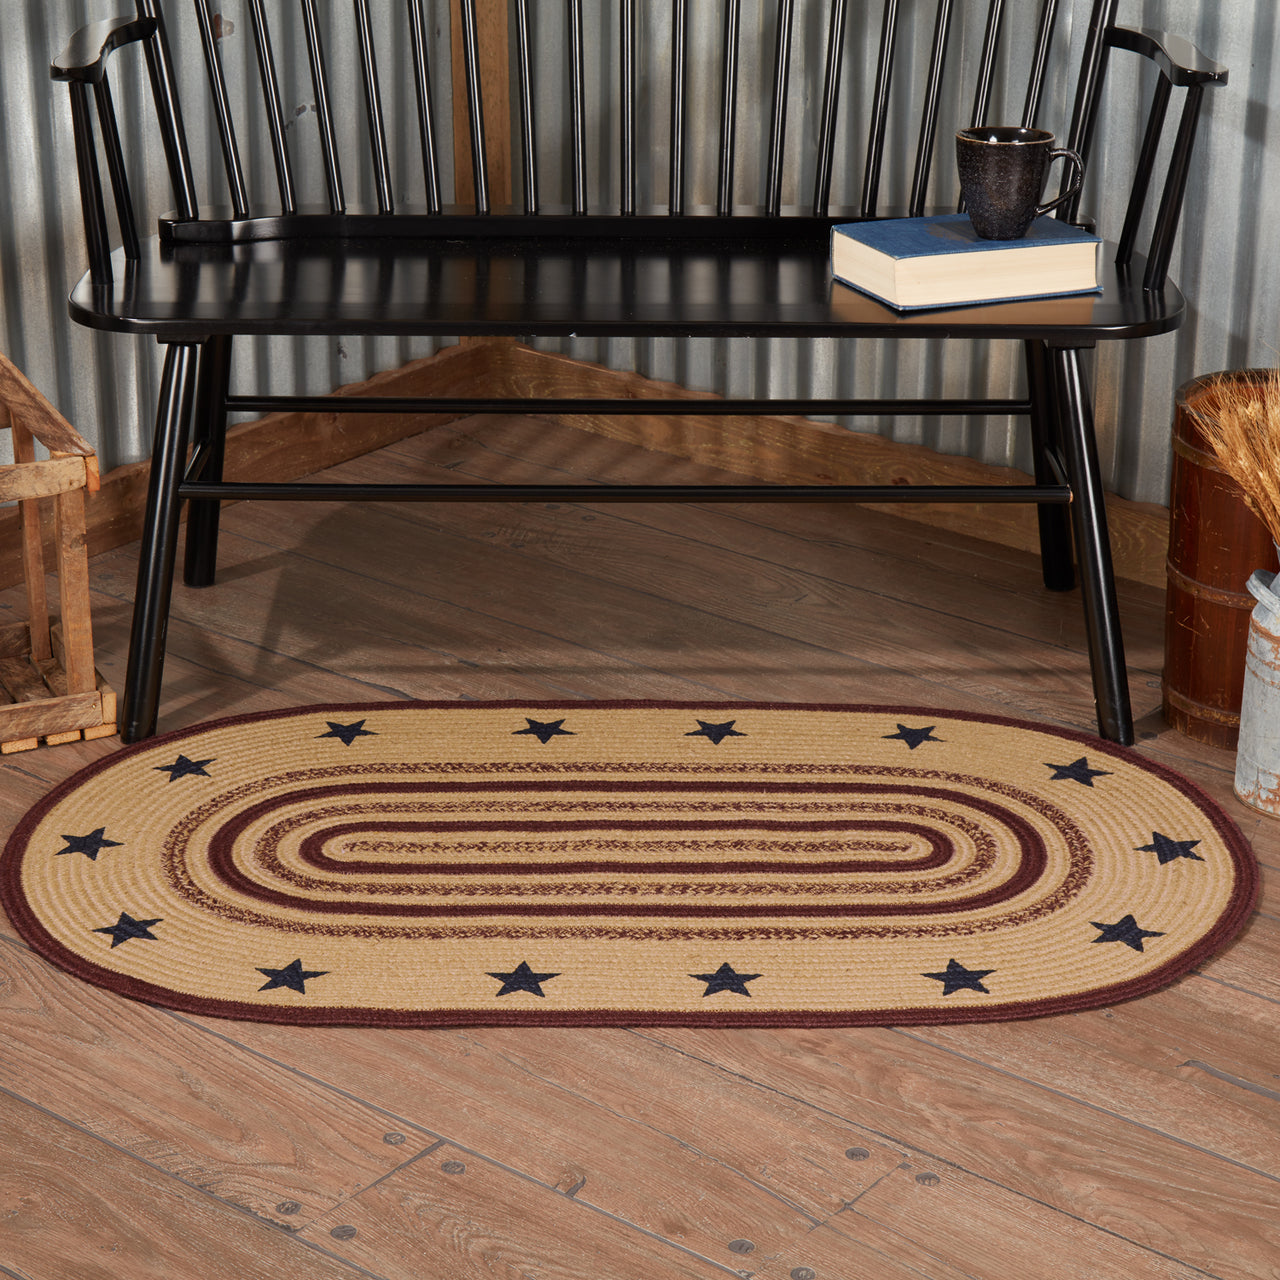 Potomac Jute Braided Rug Oval Stencil Stars 27"x48" with Rug Pad VHC Brands